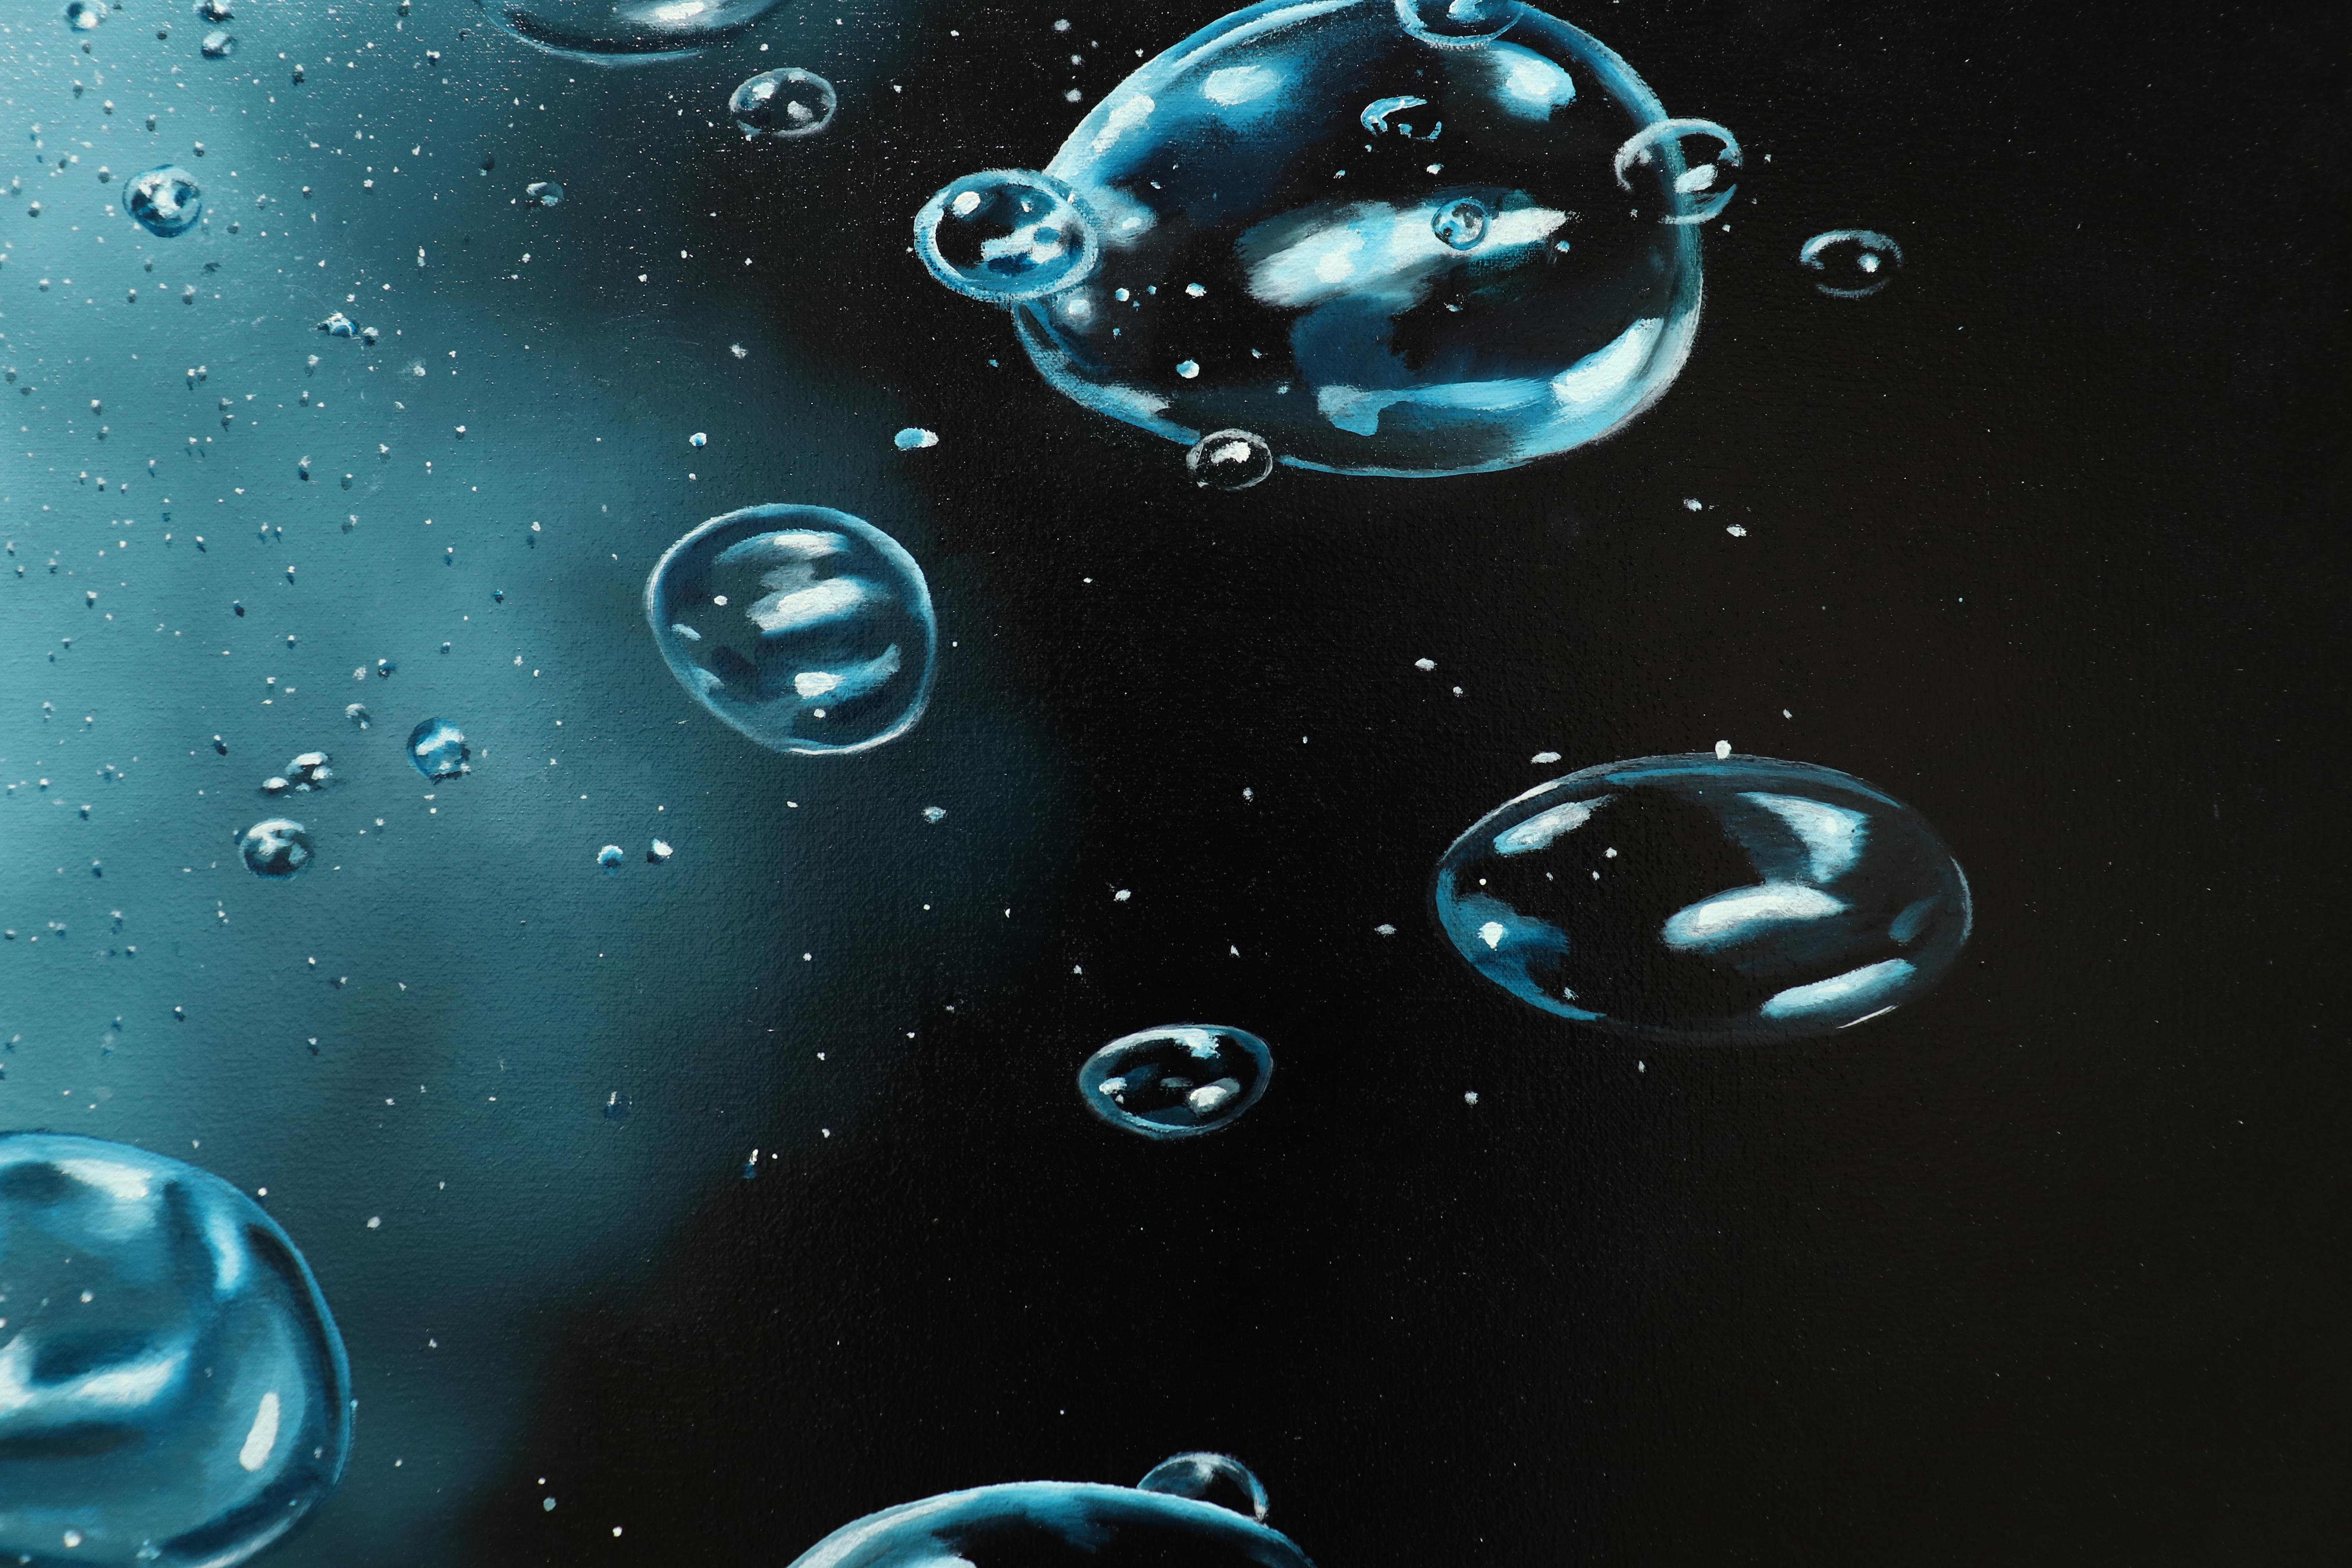 NIGHT RISE - Black and Blue / Bubbles Rising in Water / Deep Ocean - Contemporary Painting by Eric Zener